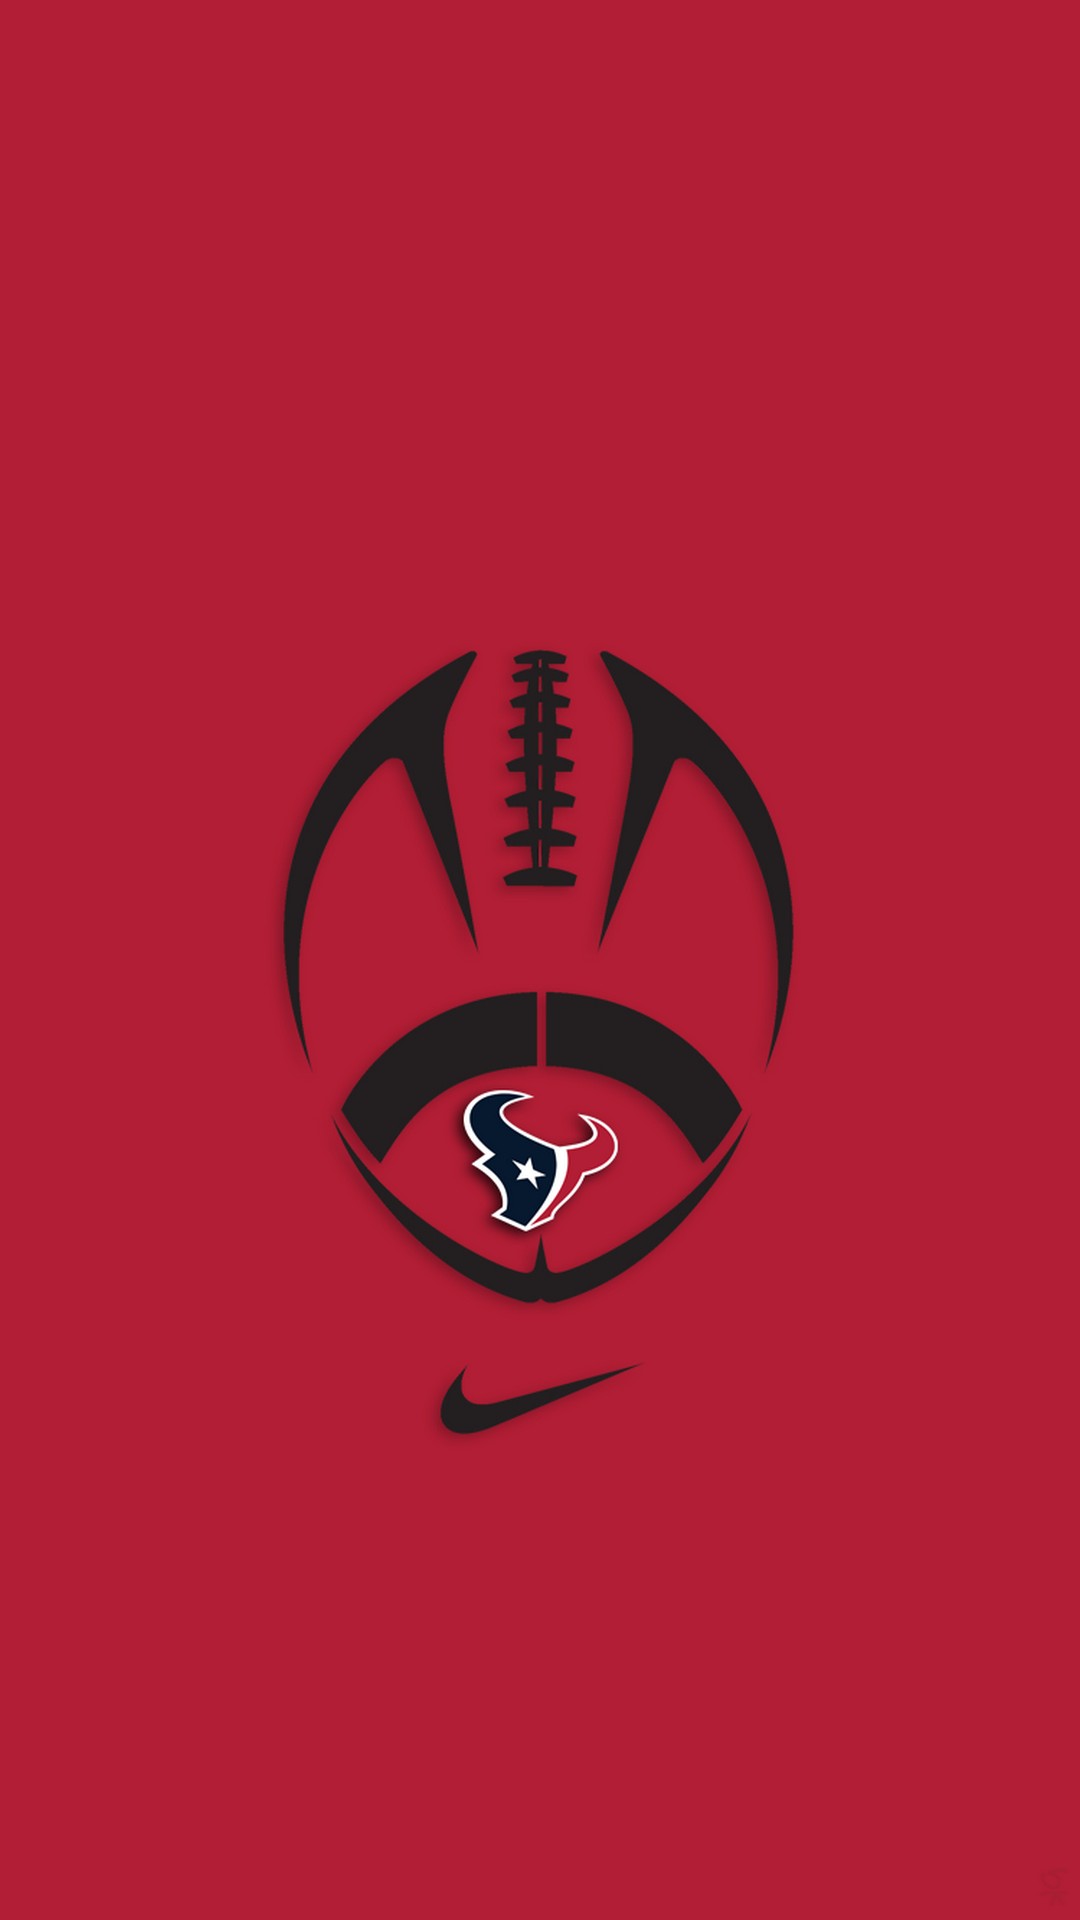 Houston Texans iPhone X Wallpaper With high-resolution 1080X1920 pixel. Download and set as wallpaper for Apple iPhone X, XS Max, XR, 8, 7, 6, SE, iPad, Android